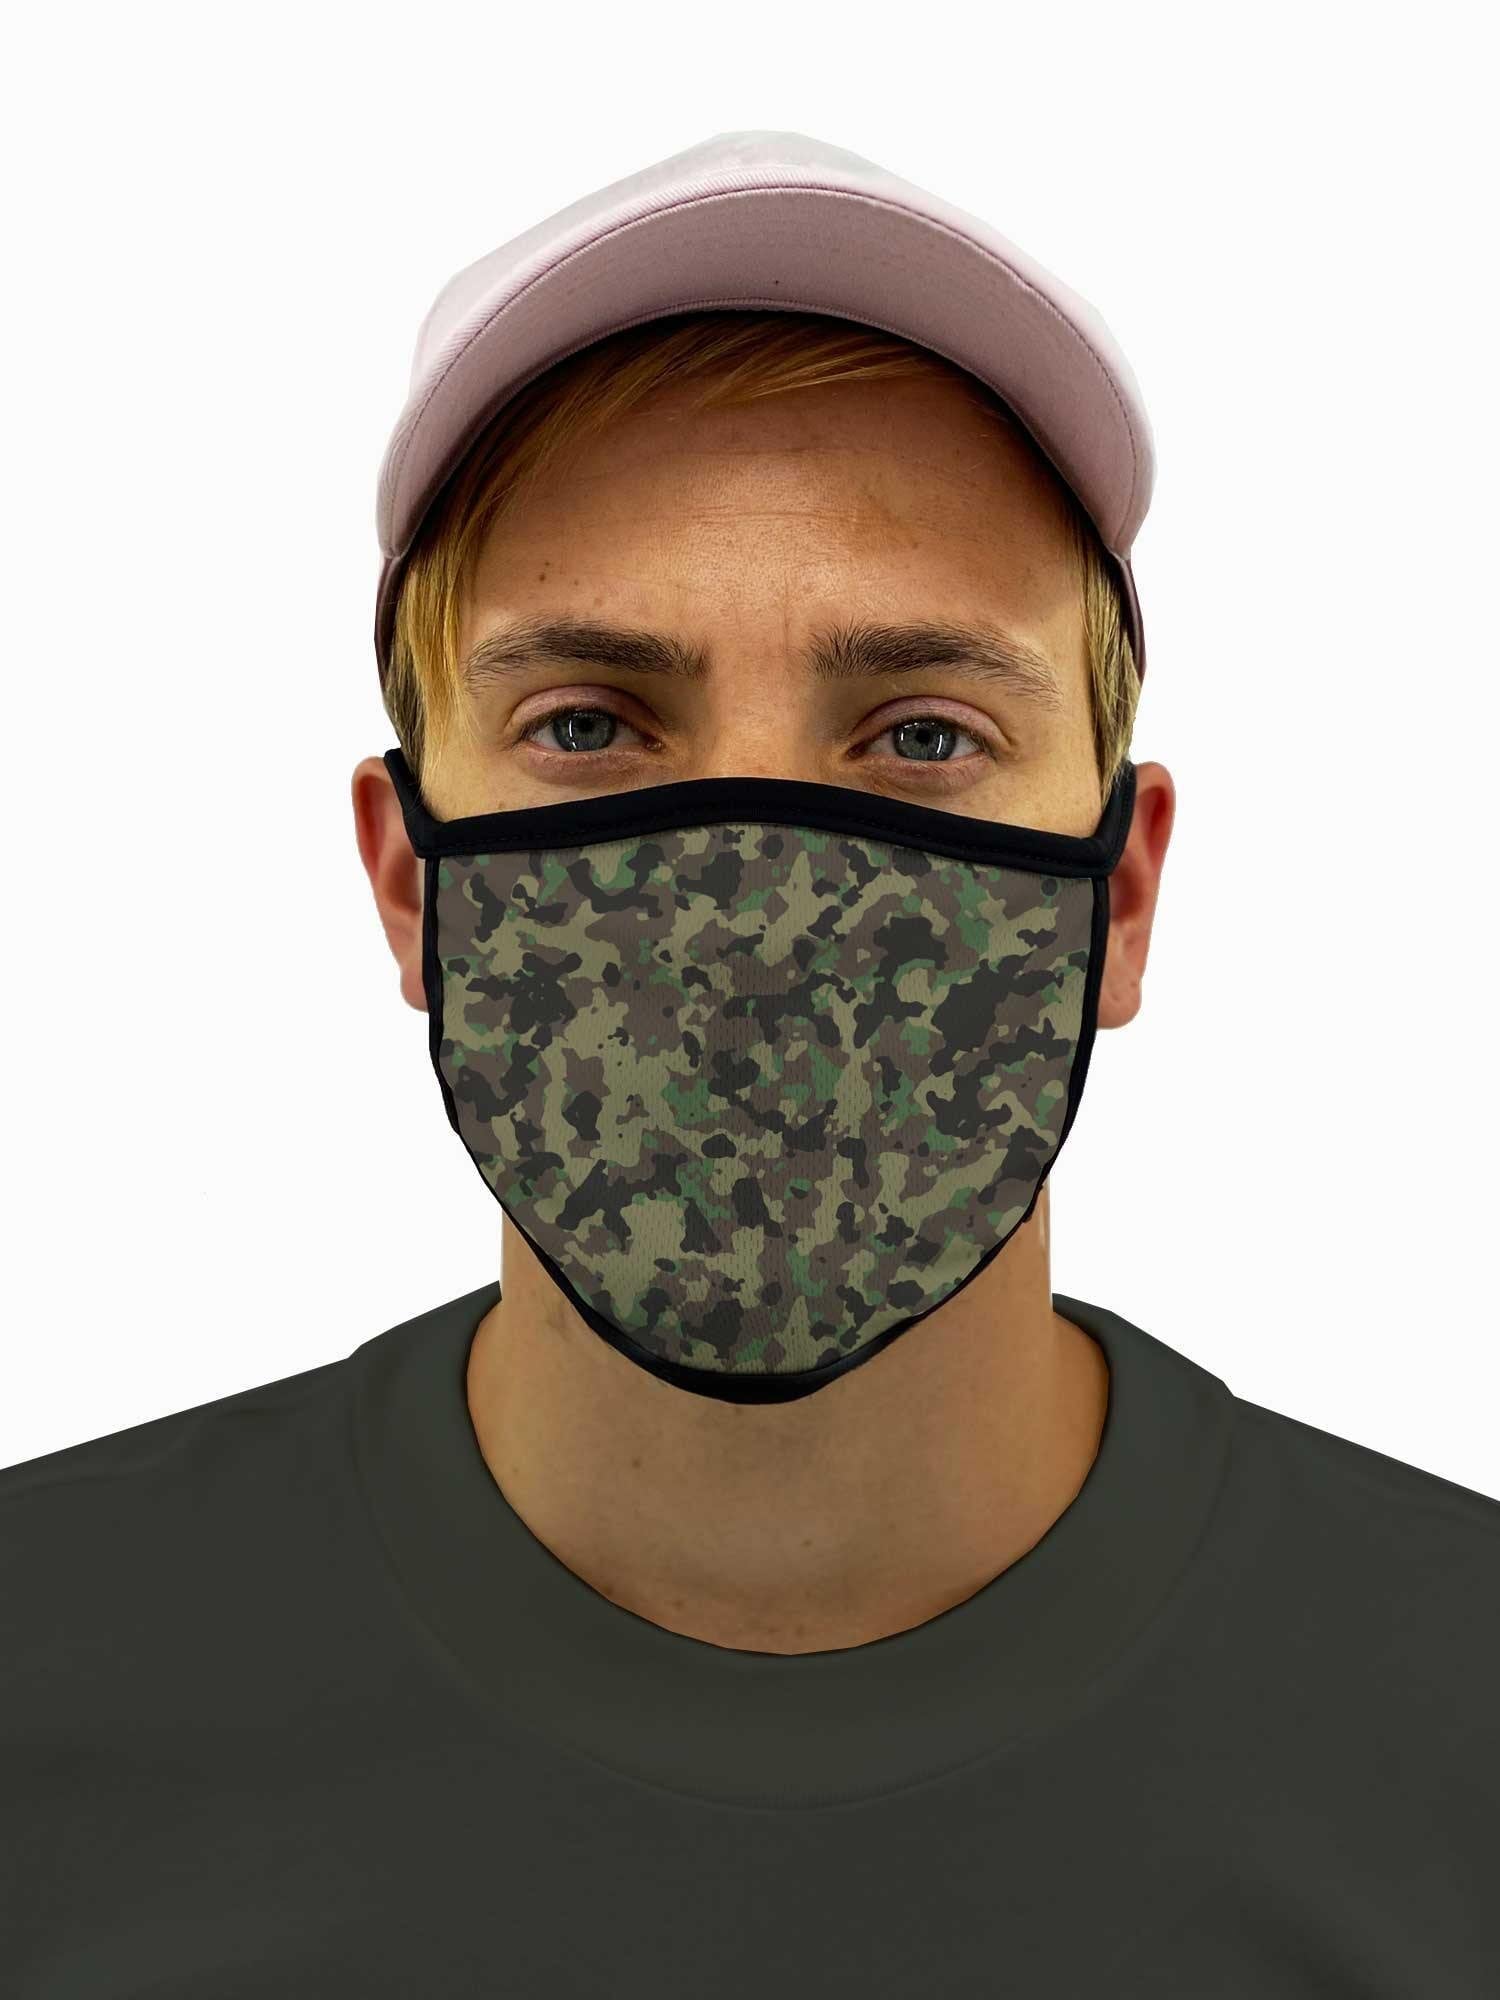 Army Camo Face Mask Filter Pocket - Made in the USA